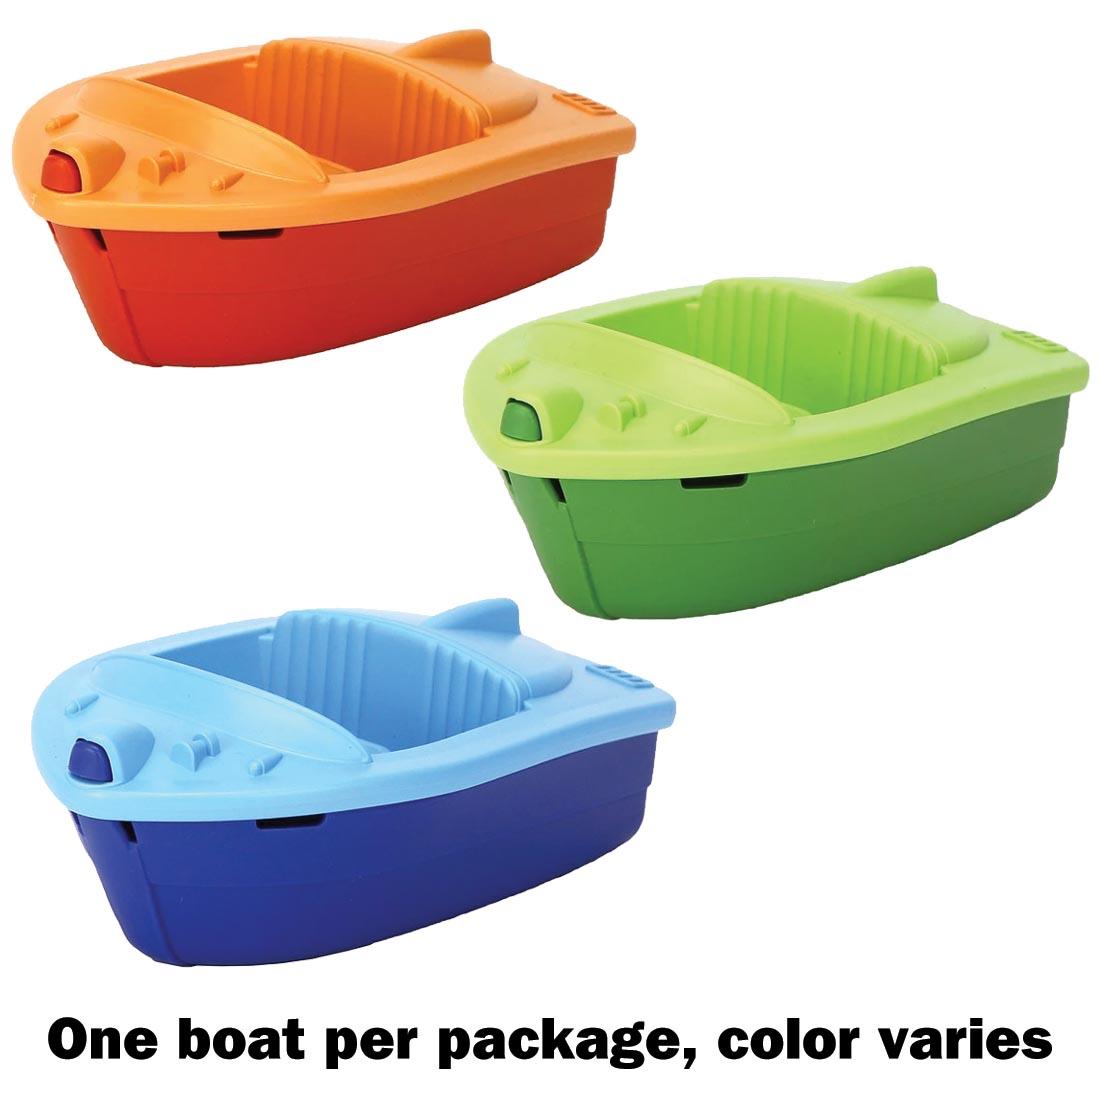 3 Green Toys Sport Boats with text One boat per package, color varies